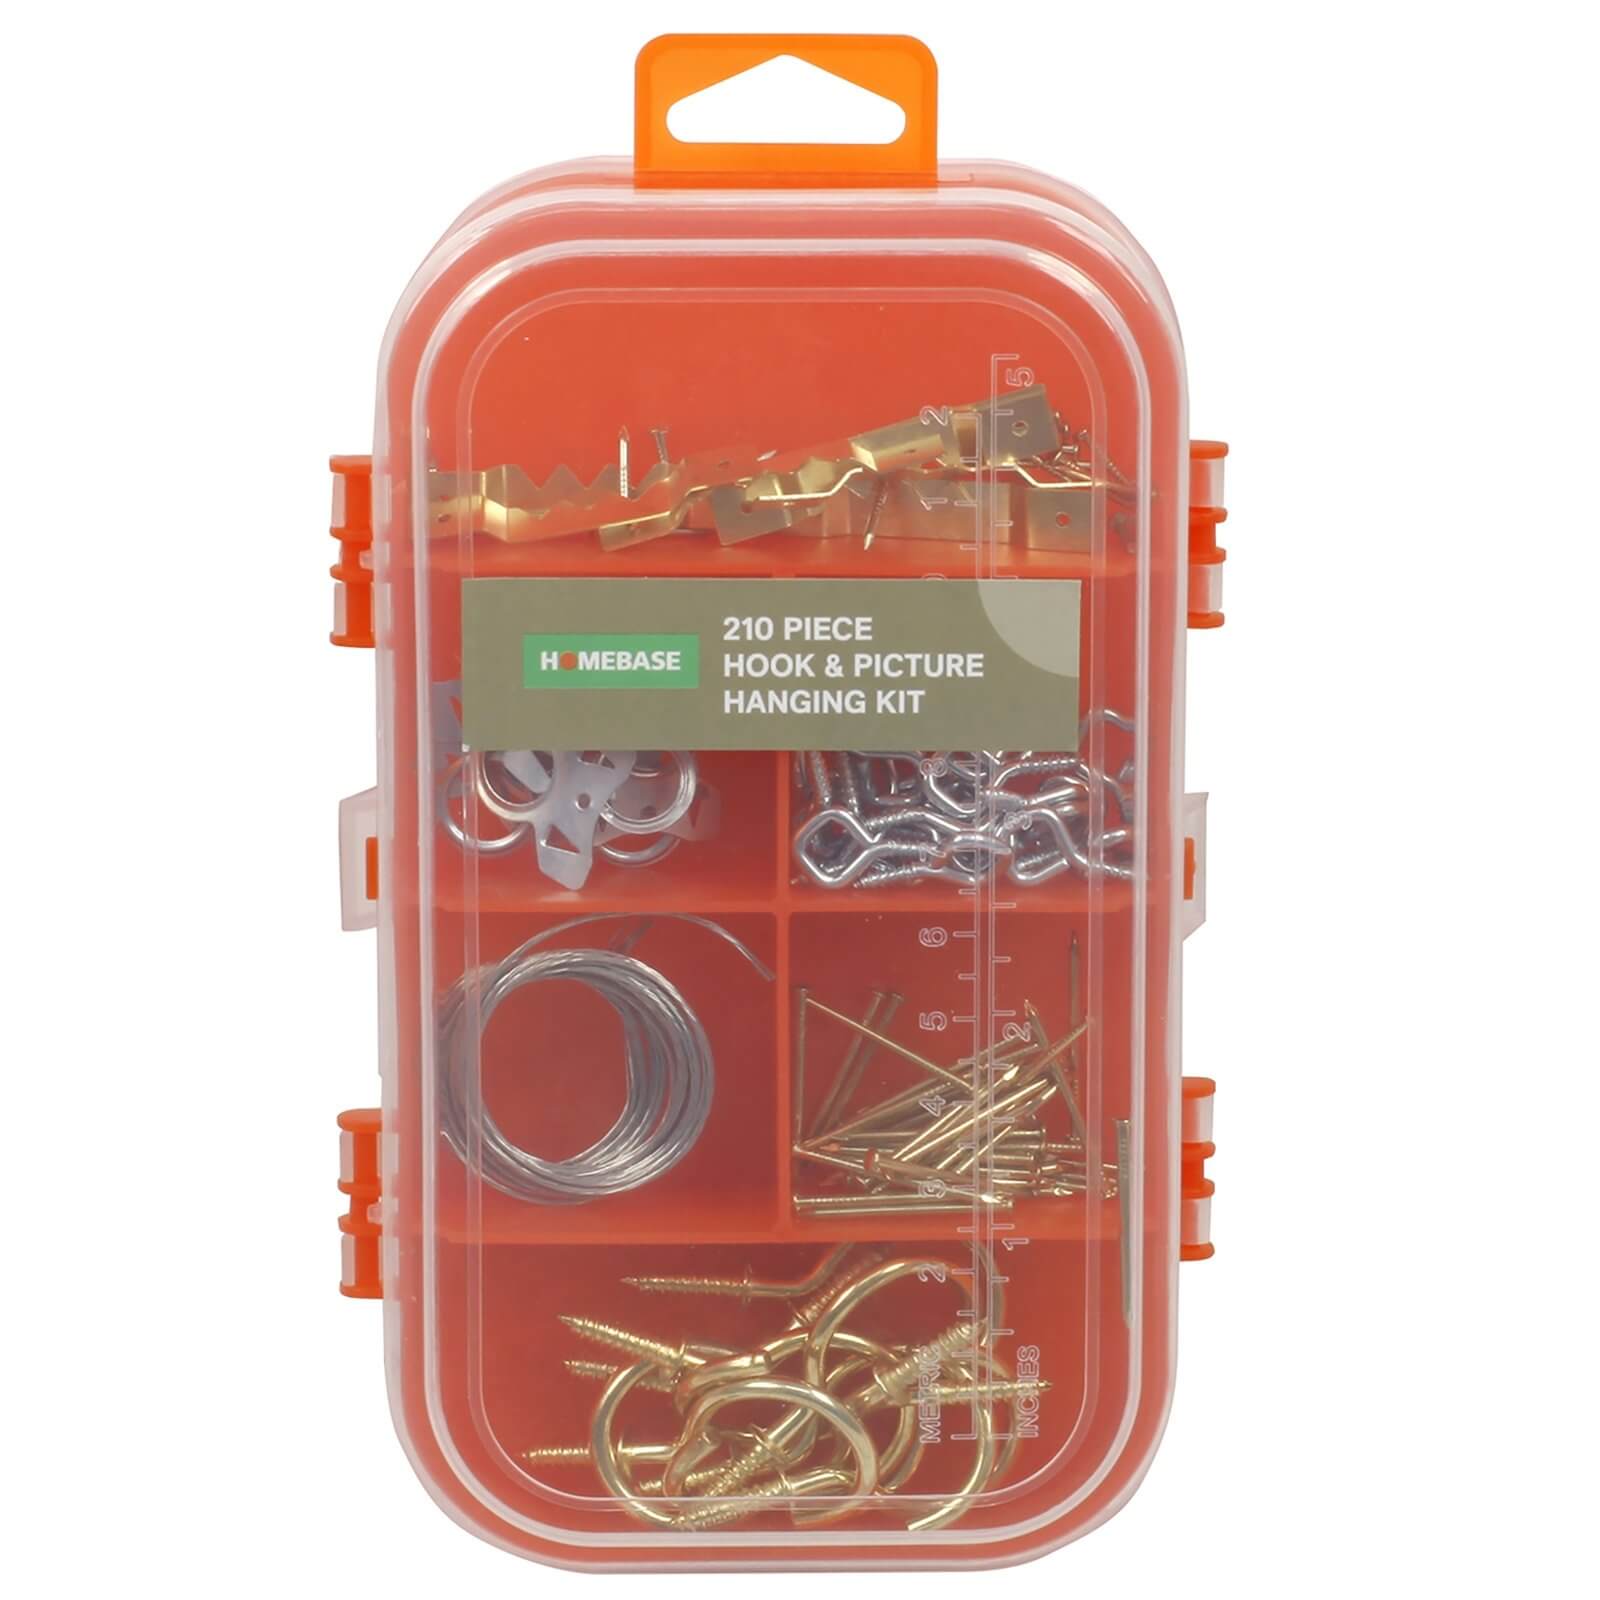 210pce Hook & Picture Hanging Kit